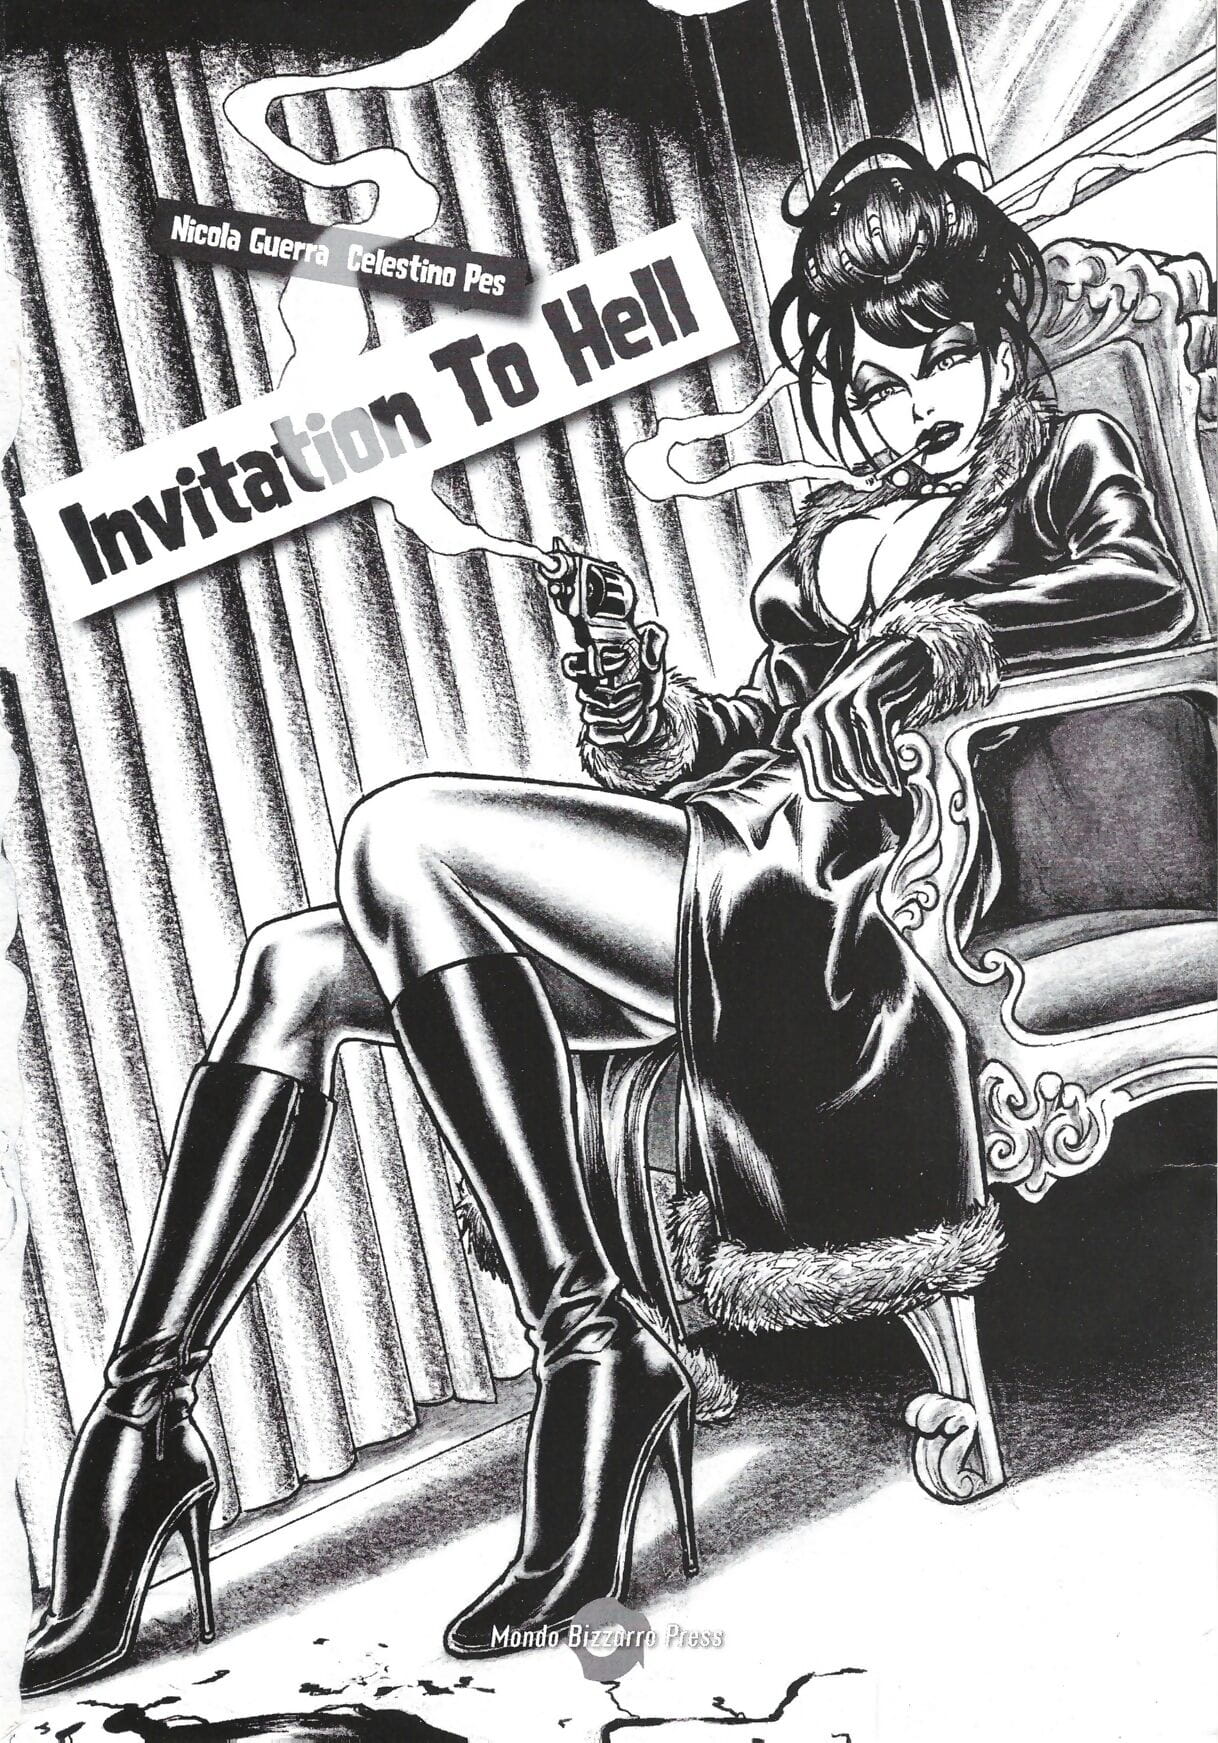 Invitation to Hell page 1